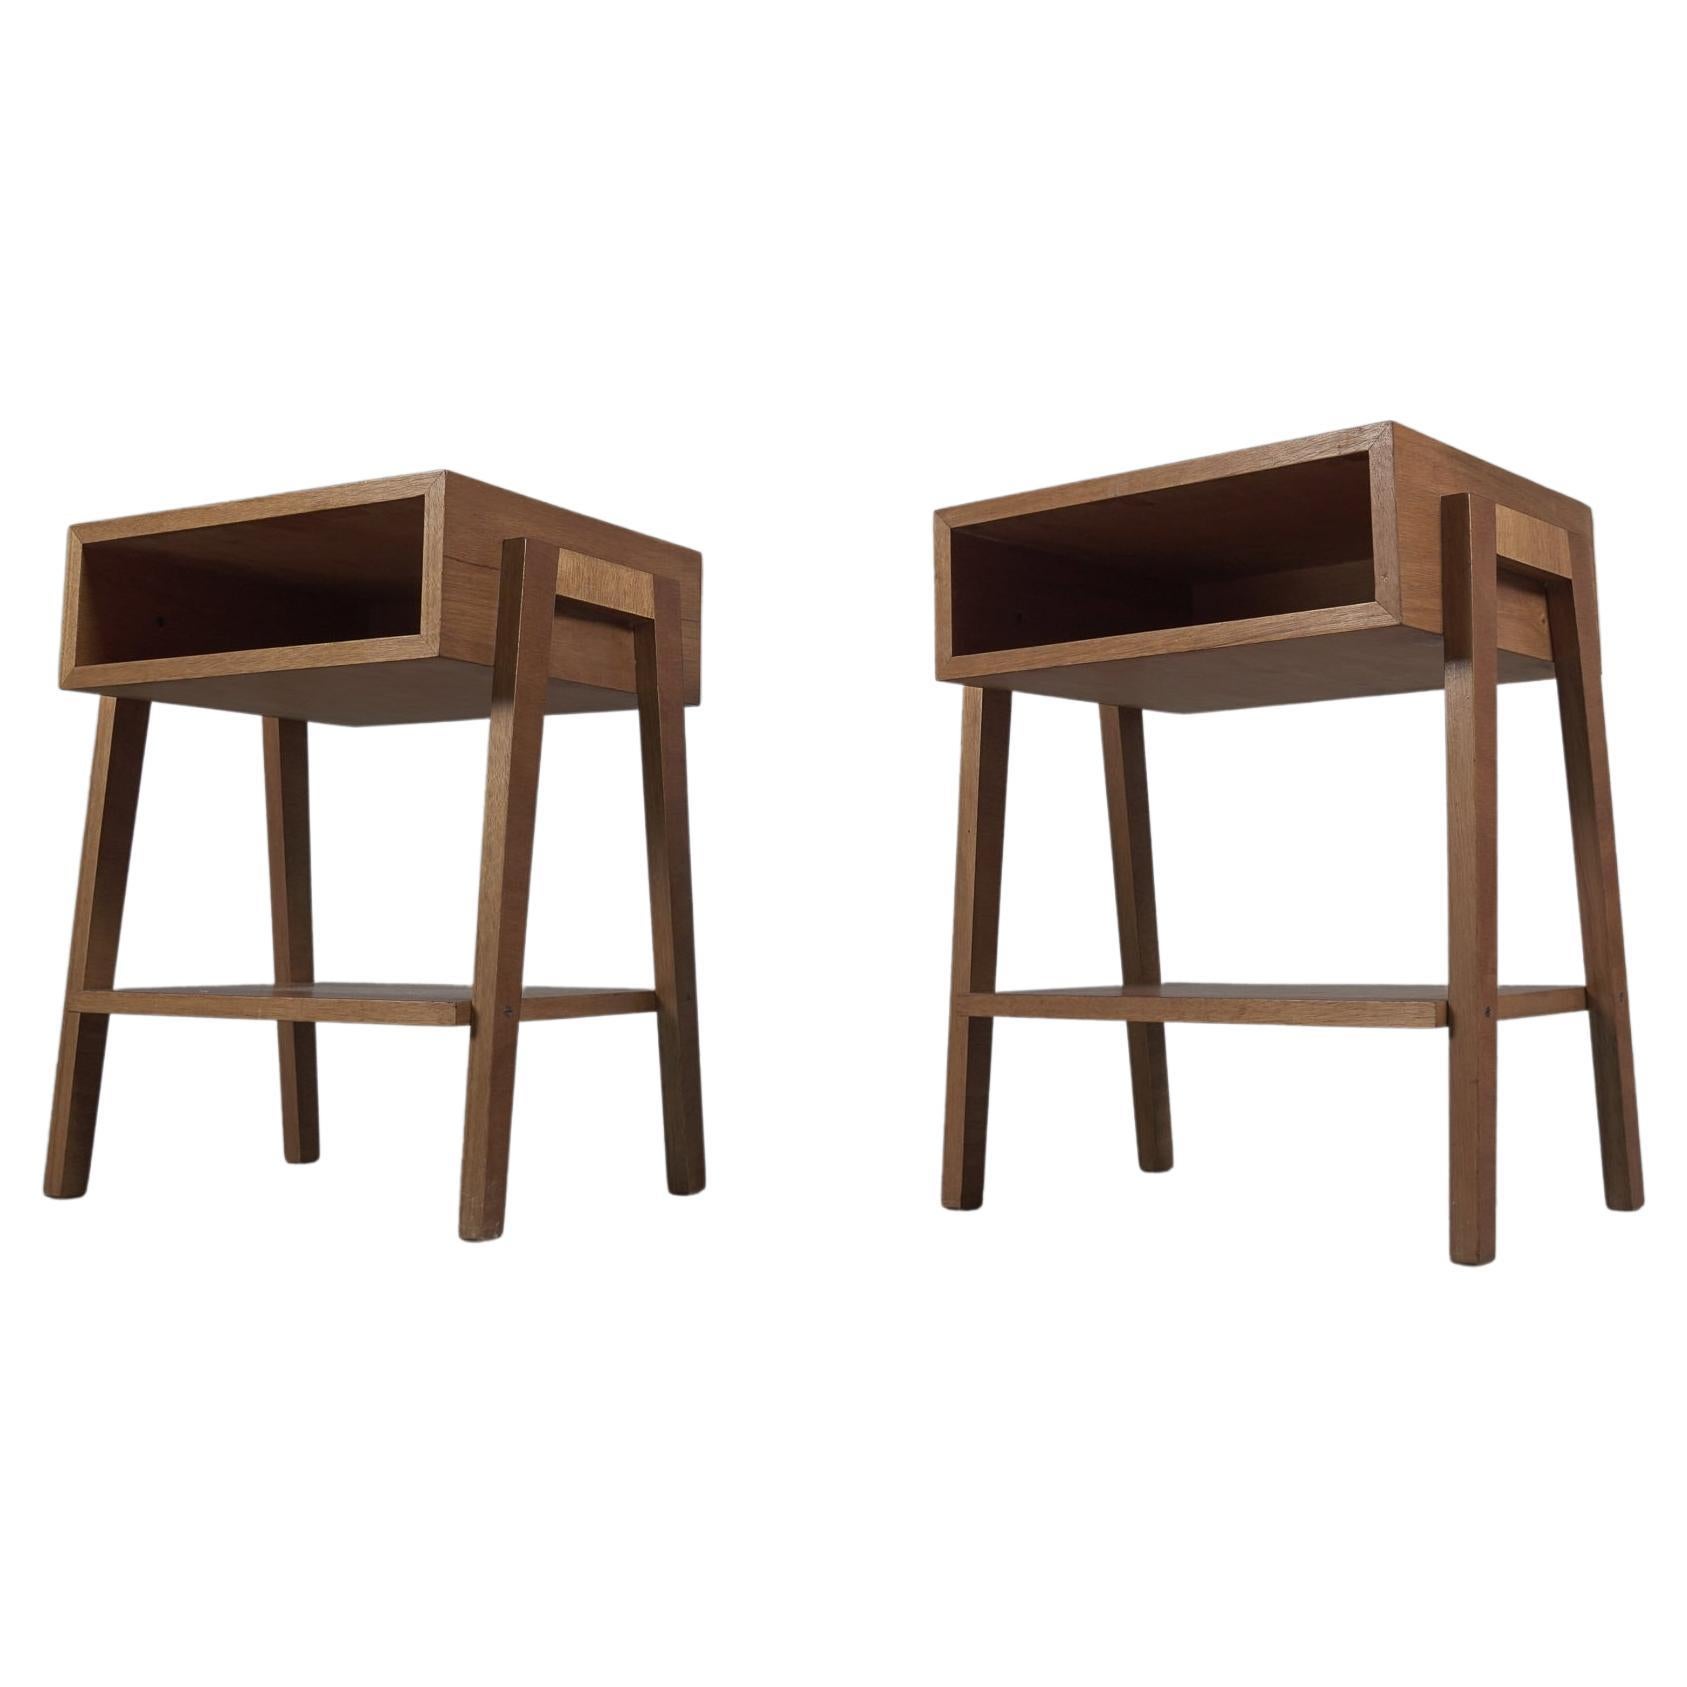  Pair of Minimalistic Mid-Century Modern Wooden Nightstands, Italy 1950s For Sale